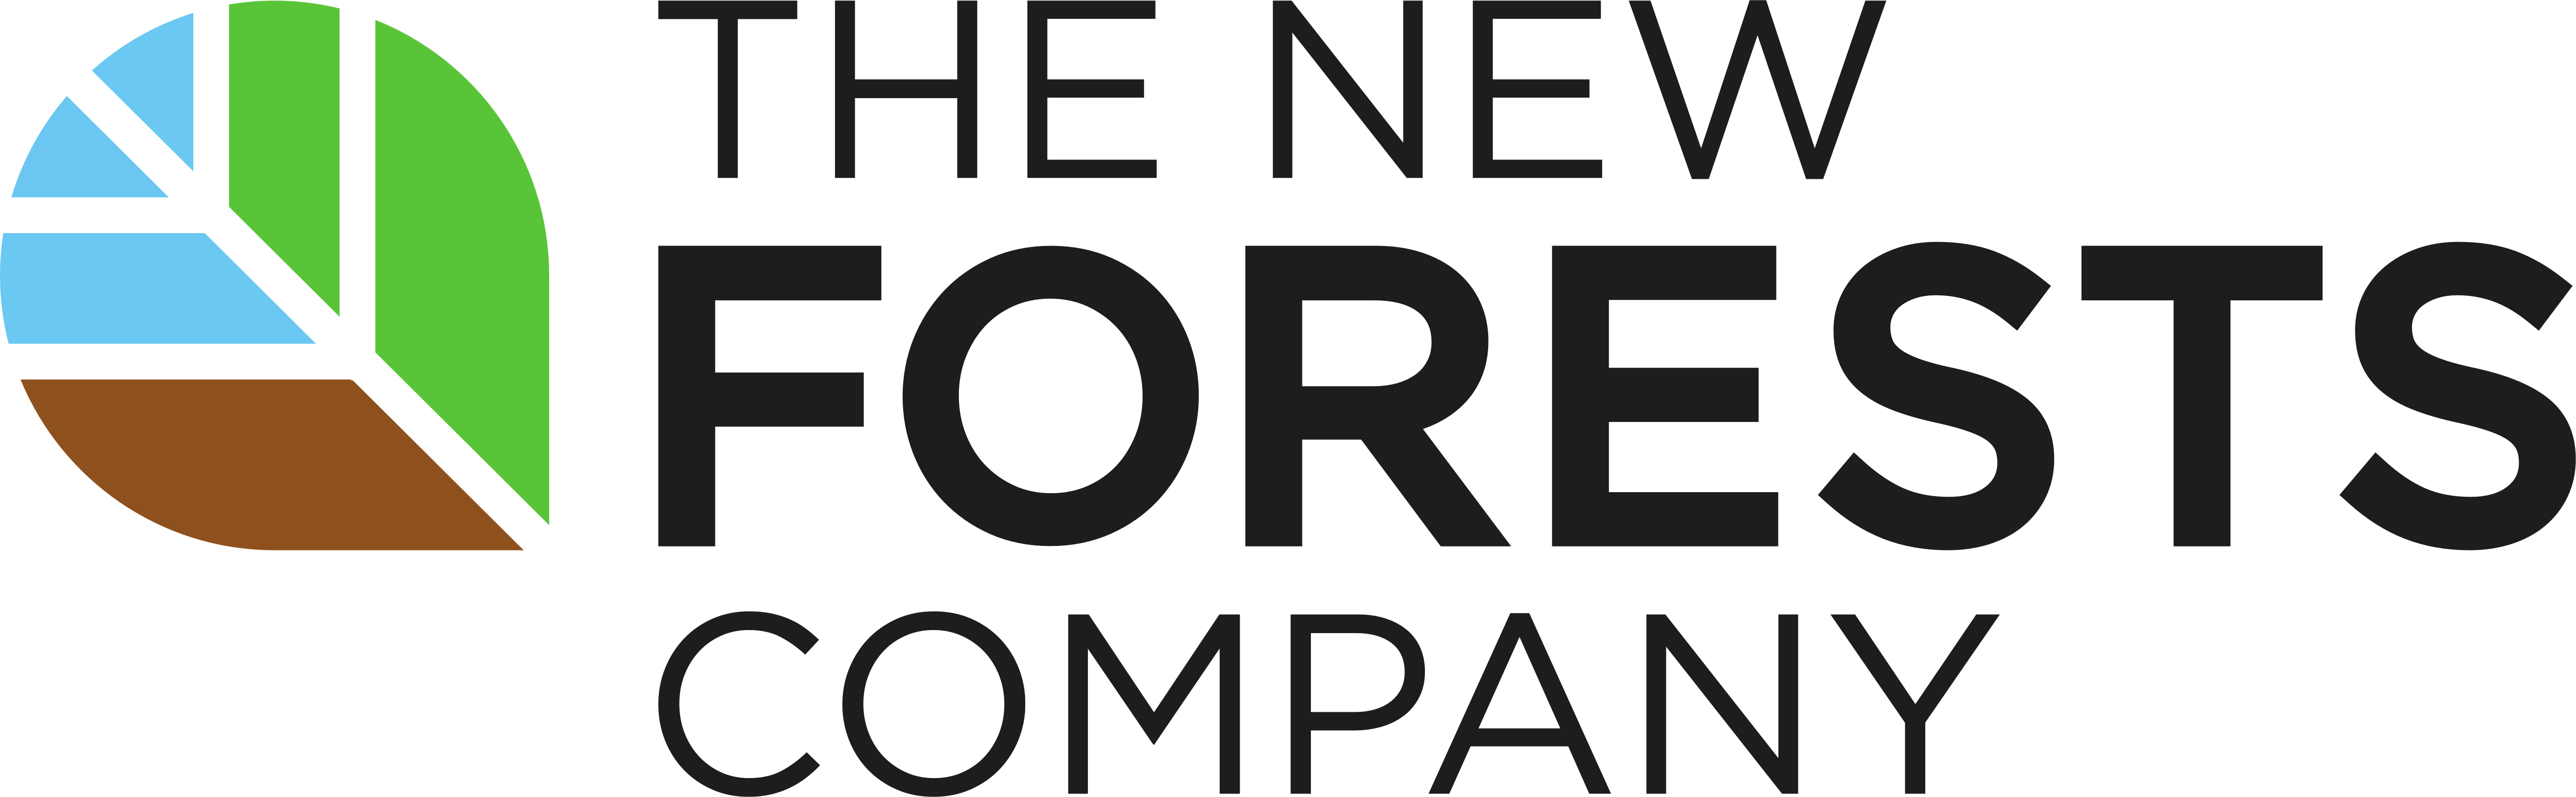 New Forests Company